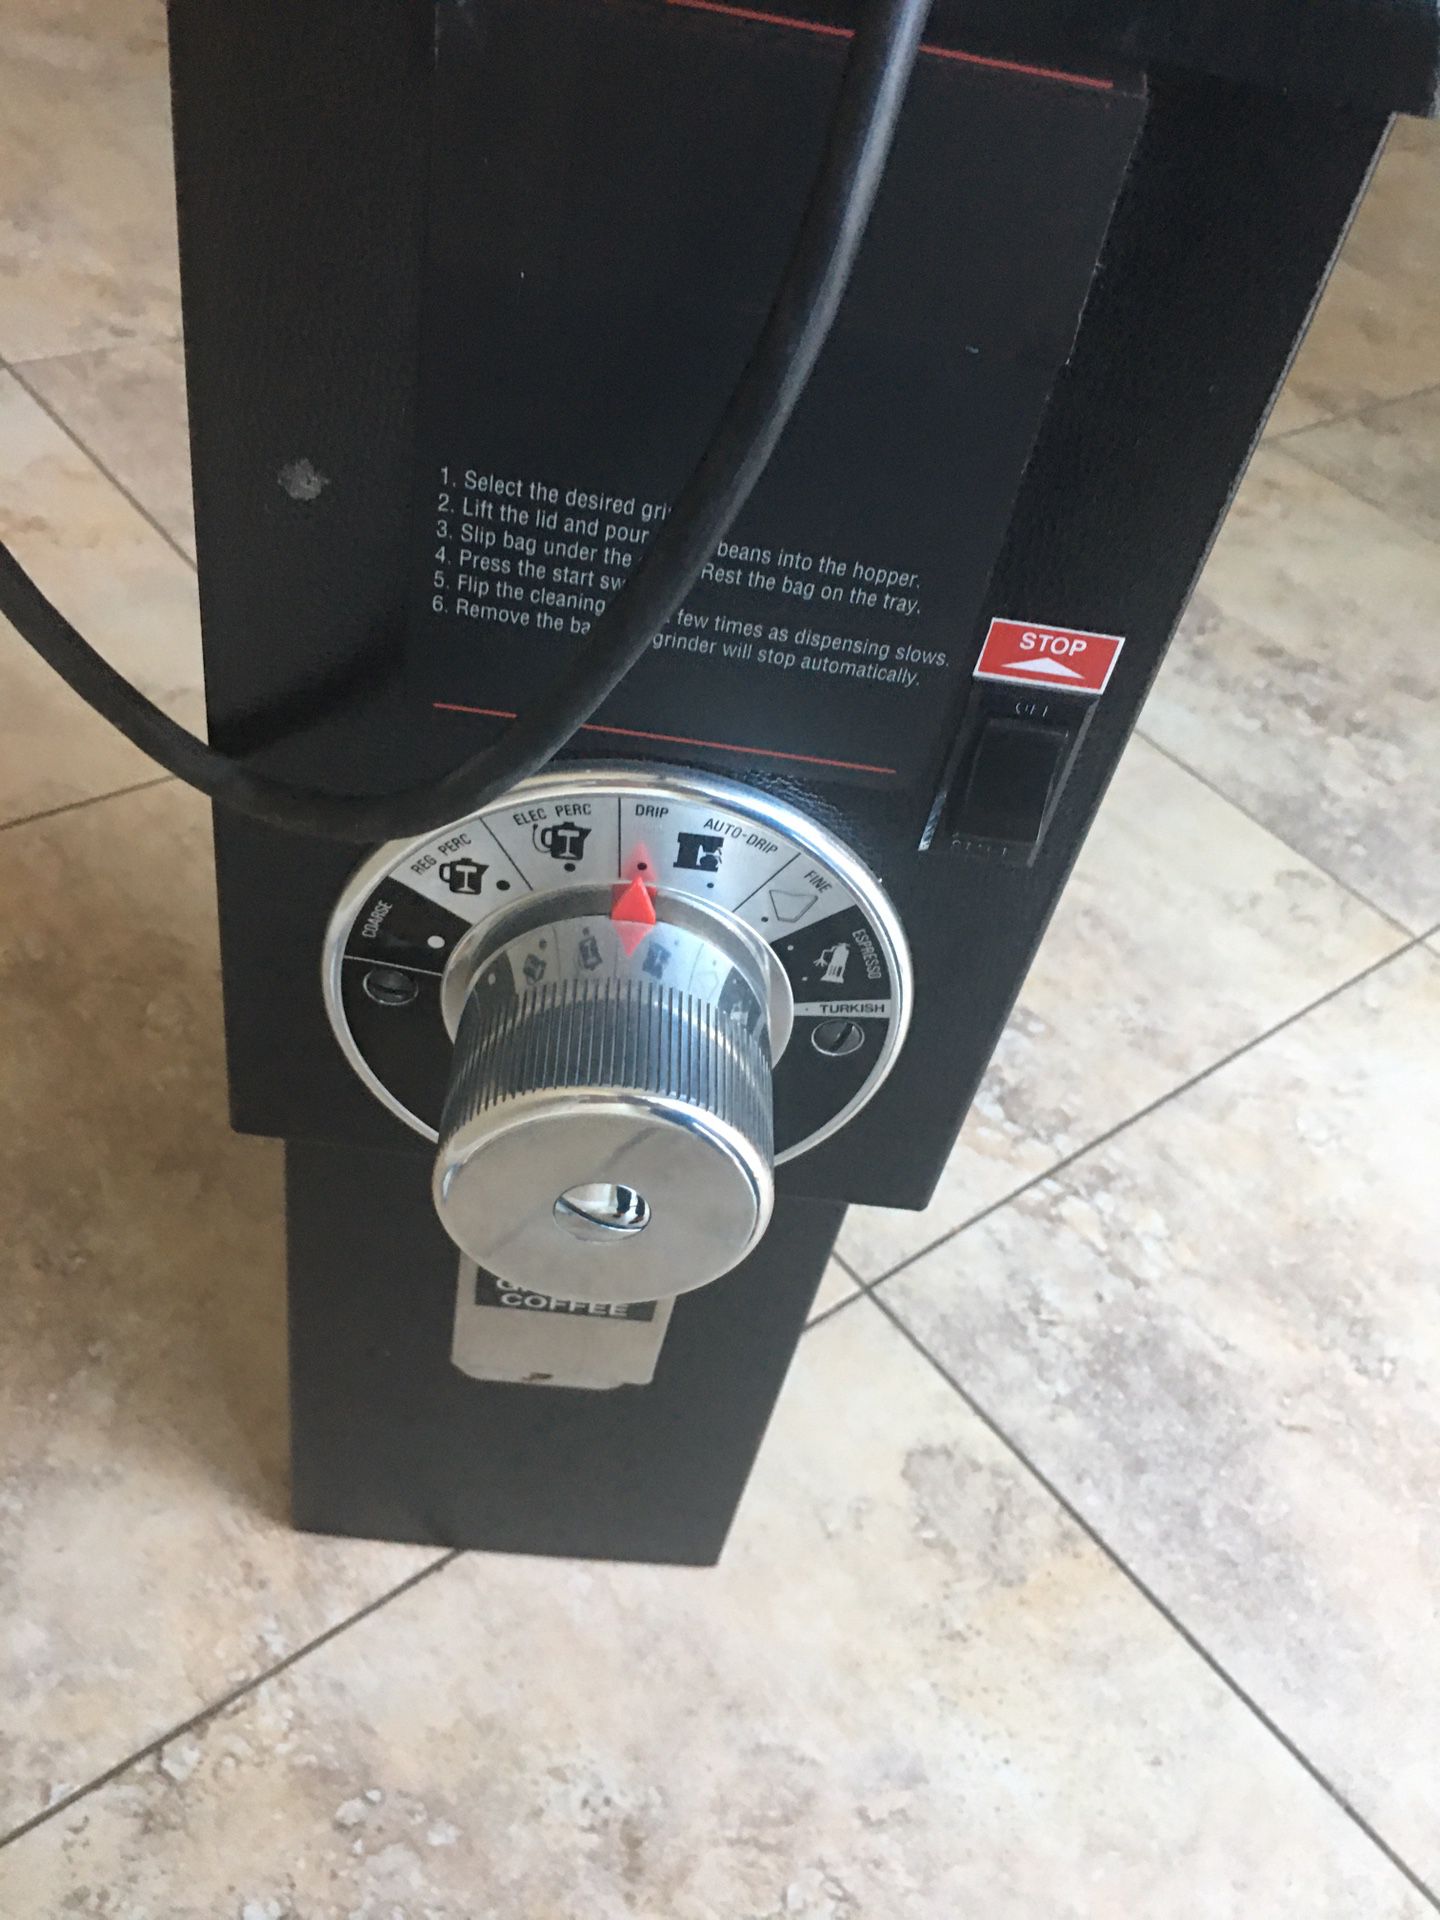 Capresso Infinity Conical Burr Grinder for Sale in Glenview, IL - OfferUp